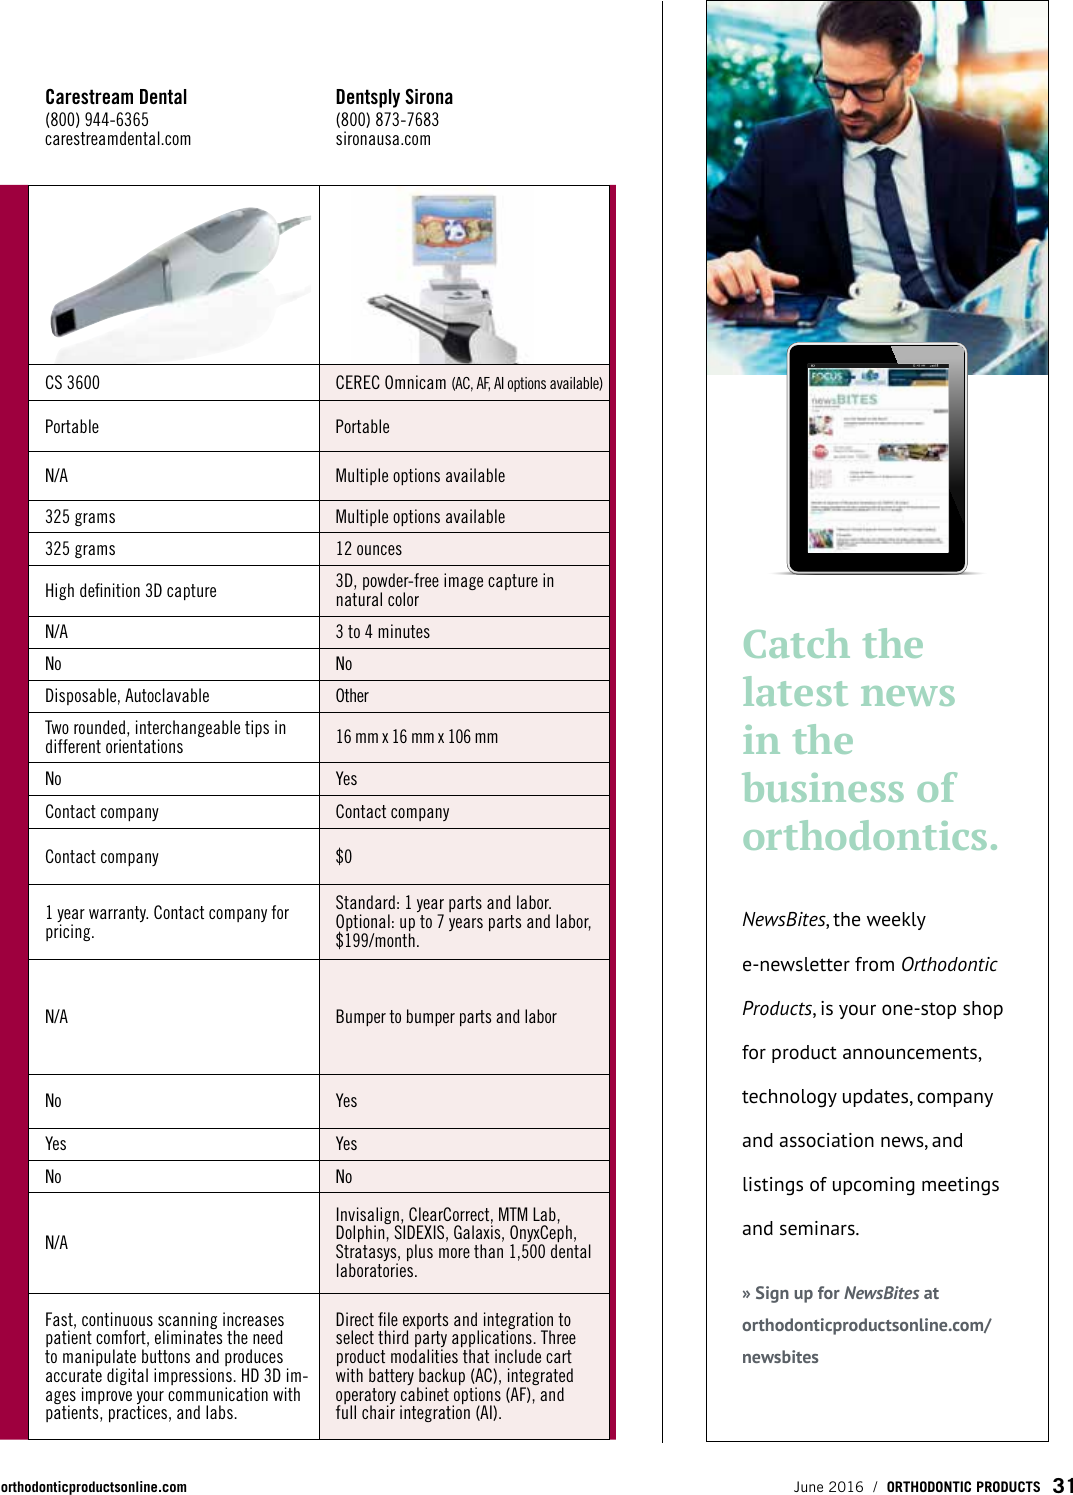 Page 2 of 2 - 2016 Focus Intraoral Scanners